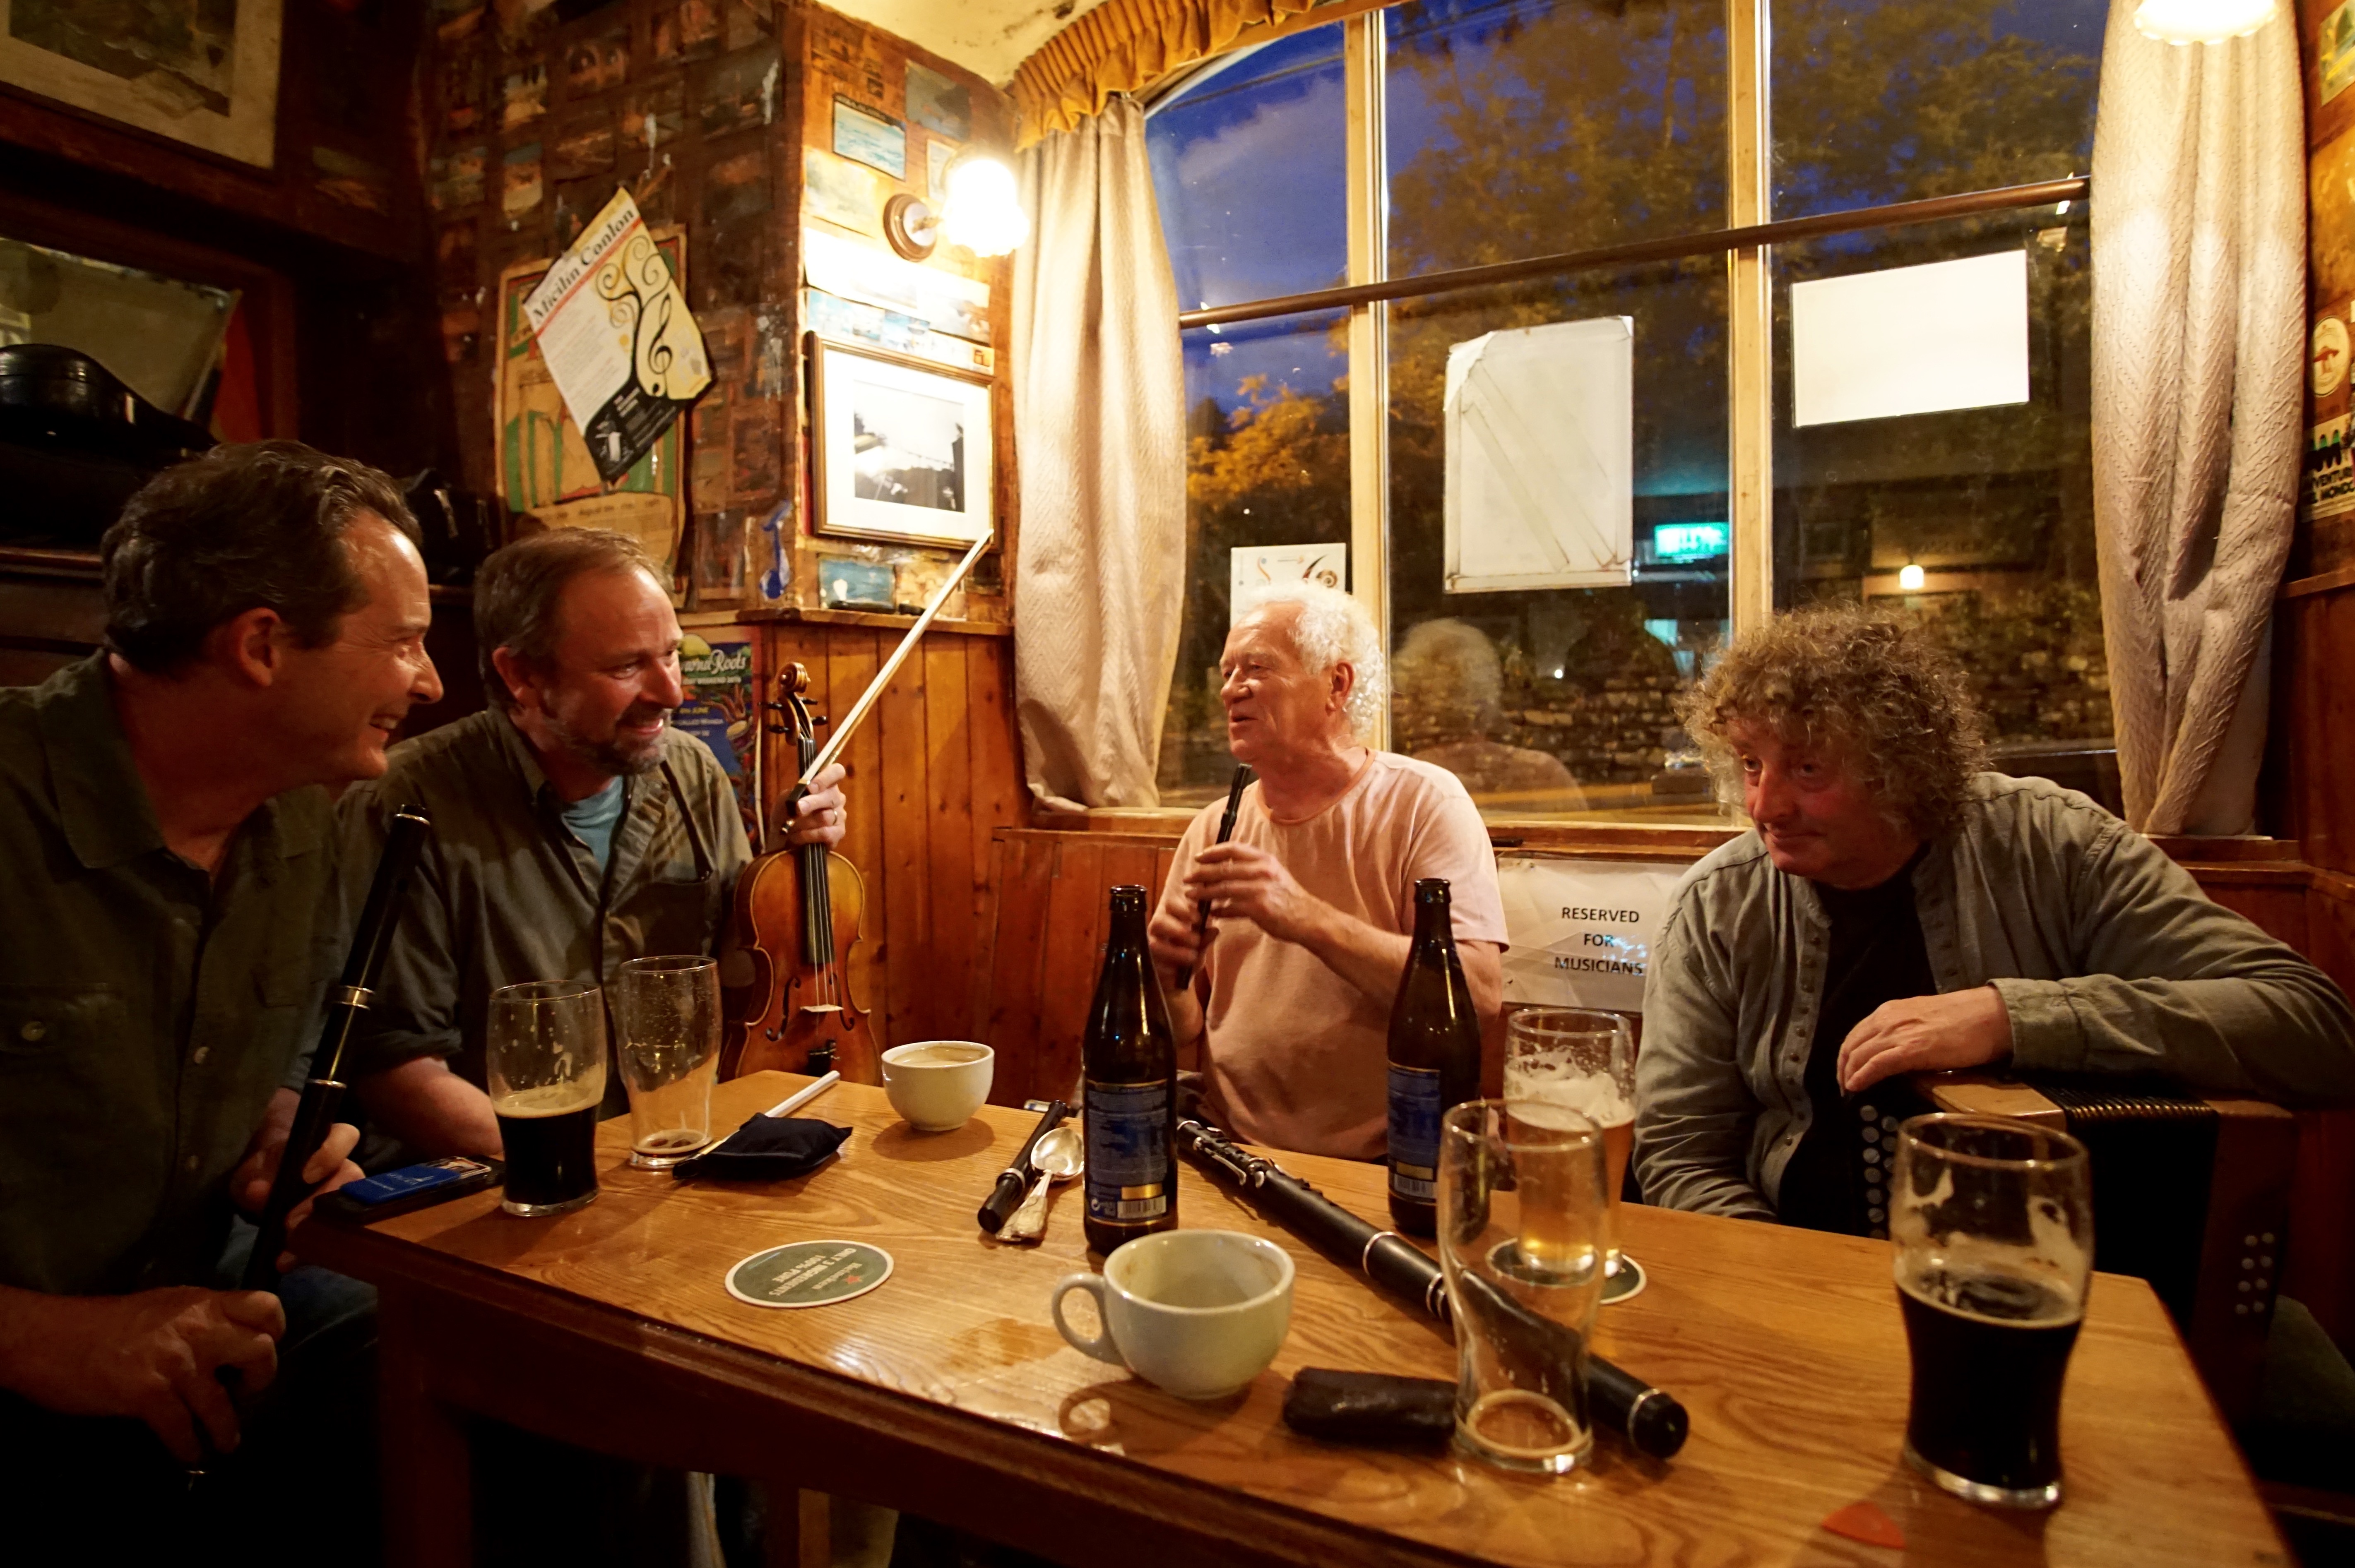 James, Morgan, Christy Barry, and Terry Bingham at a session at the Roadside Tavern in Lisdoonvarna, Co. Clare, June 2018